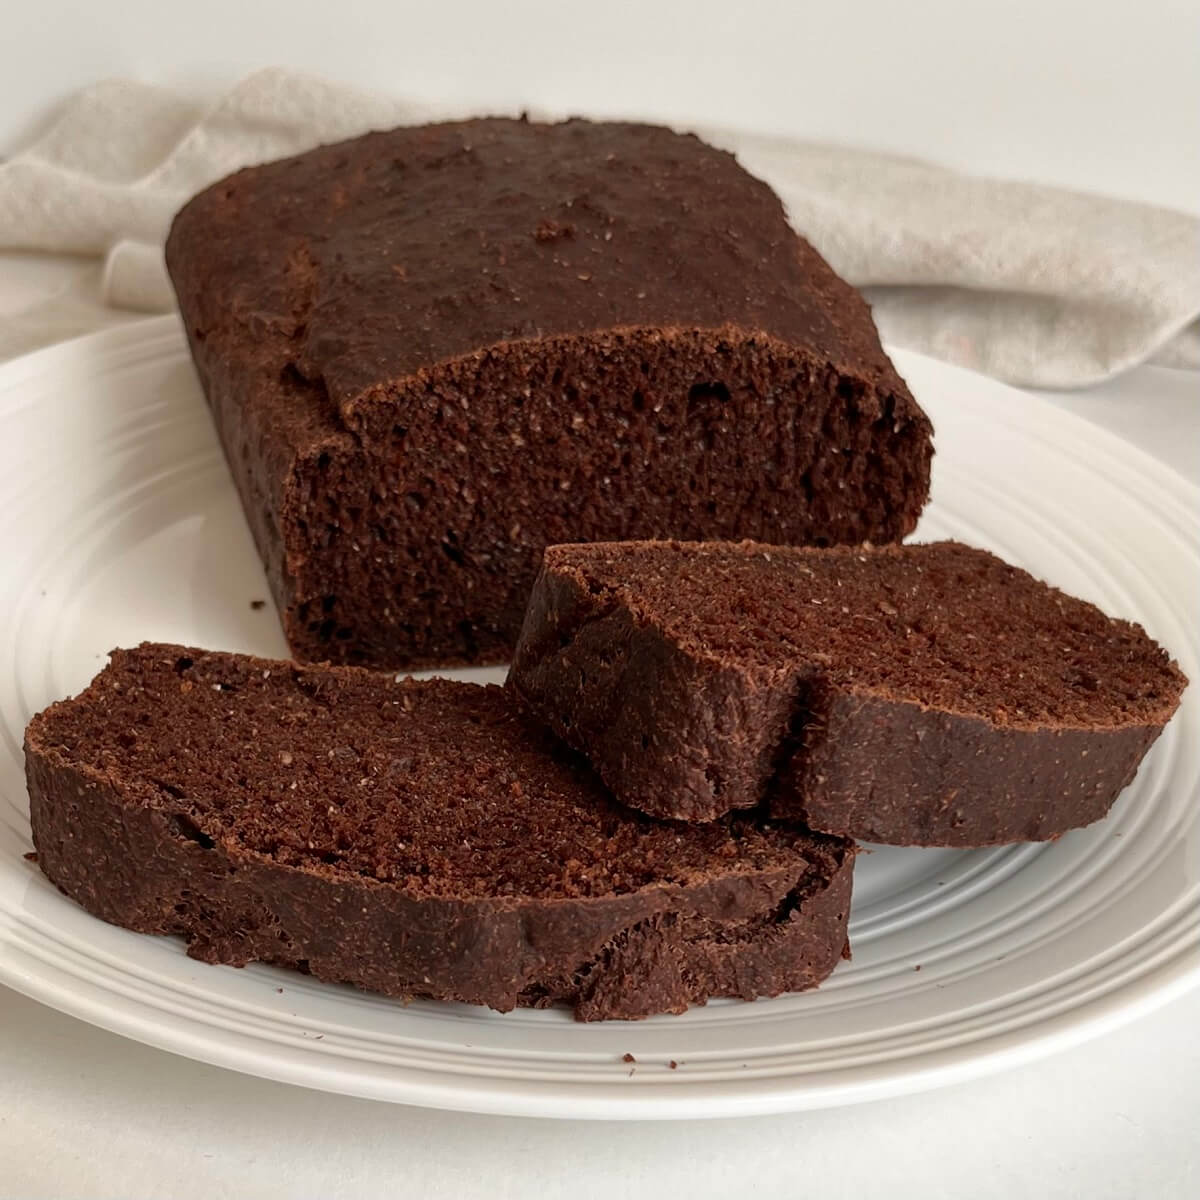 A loaf of chocolate bread with two thick slices cut.